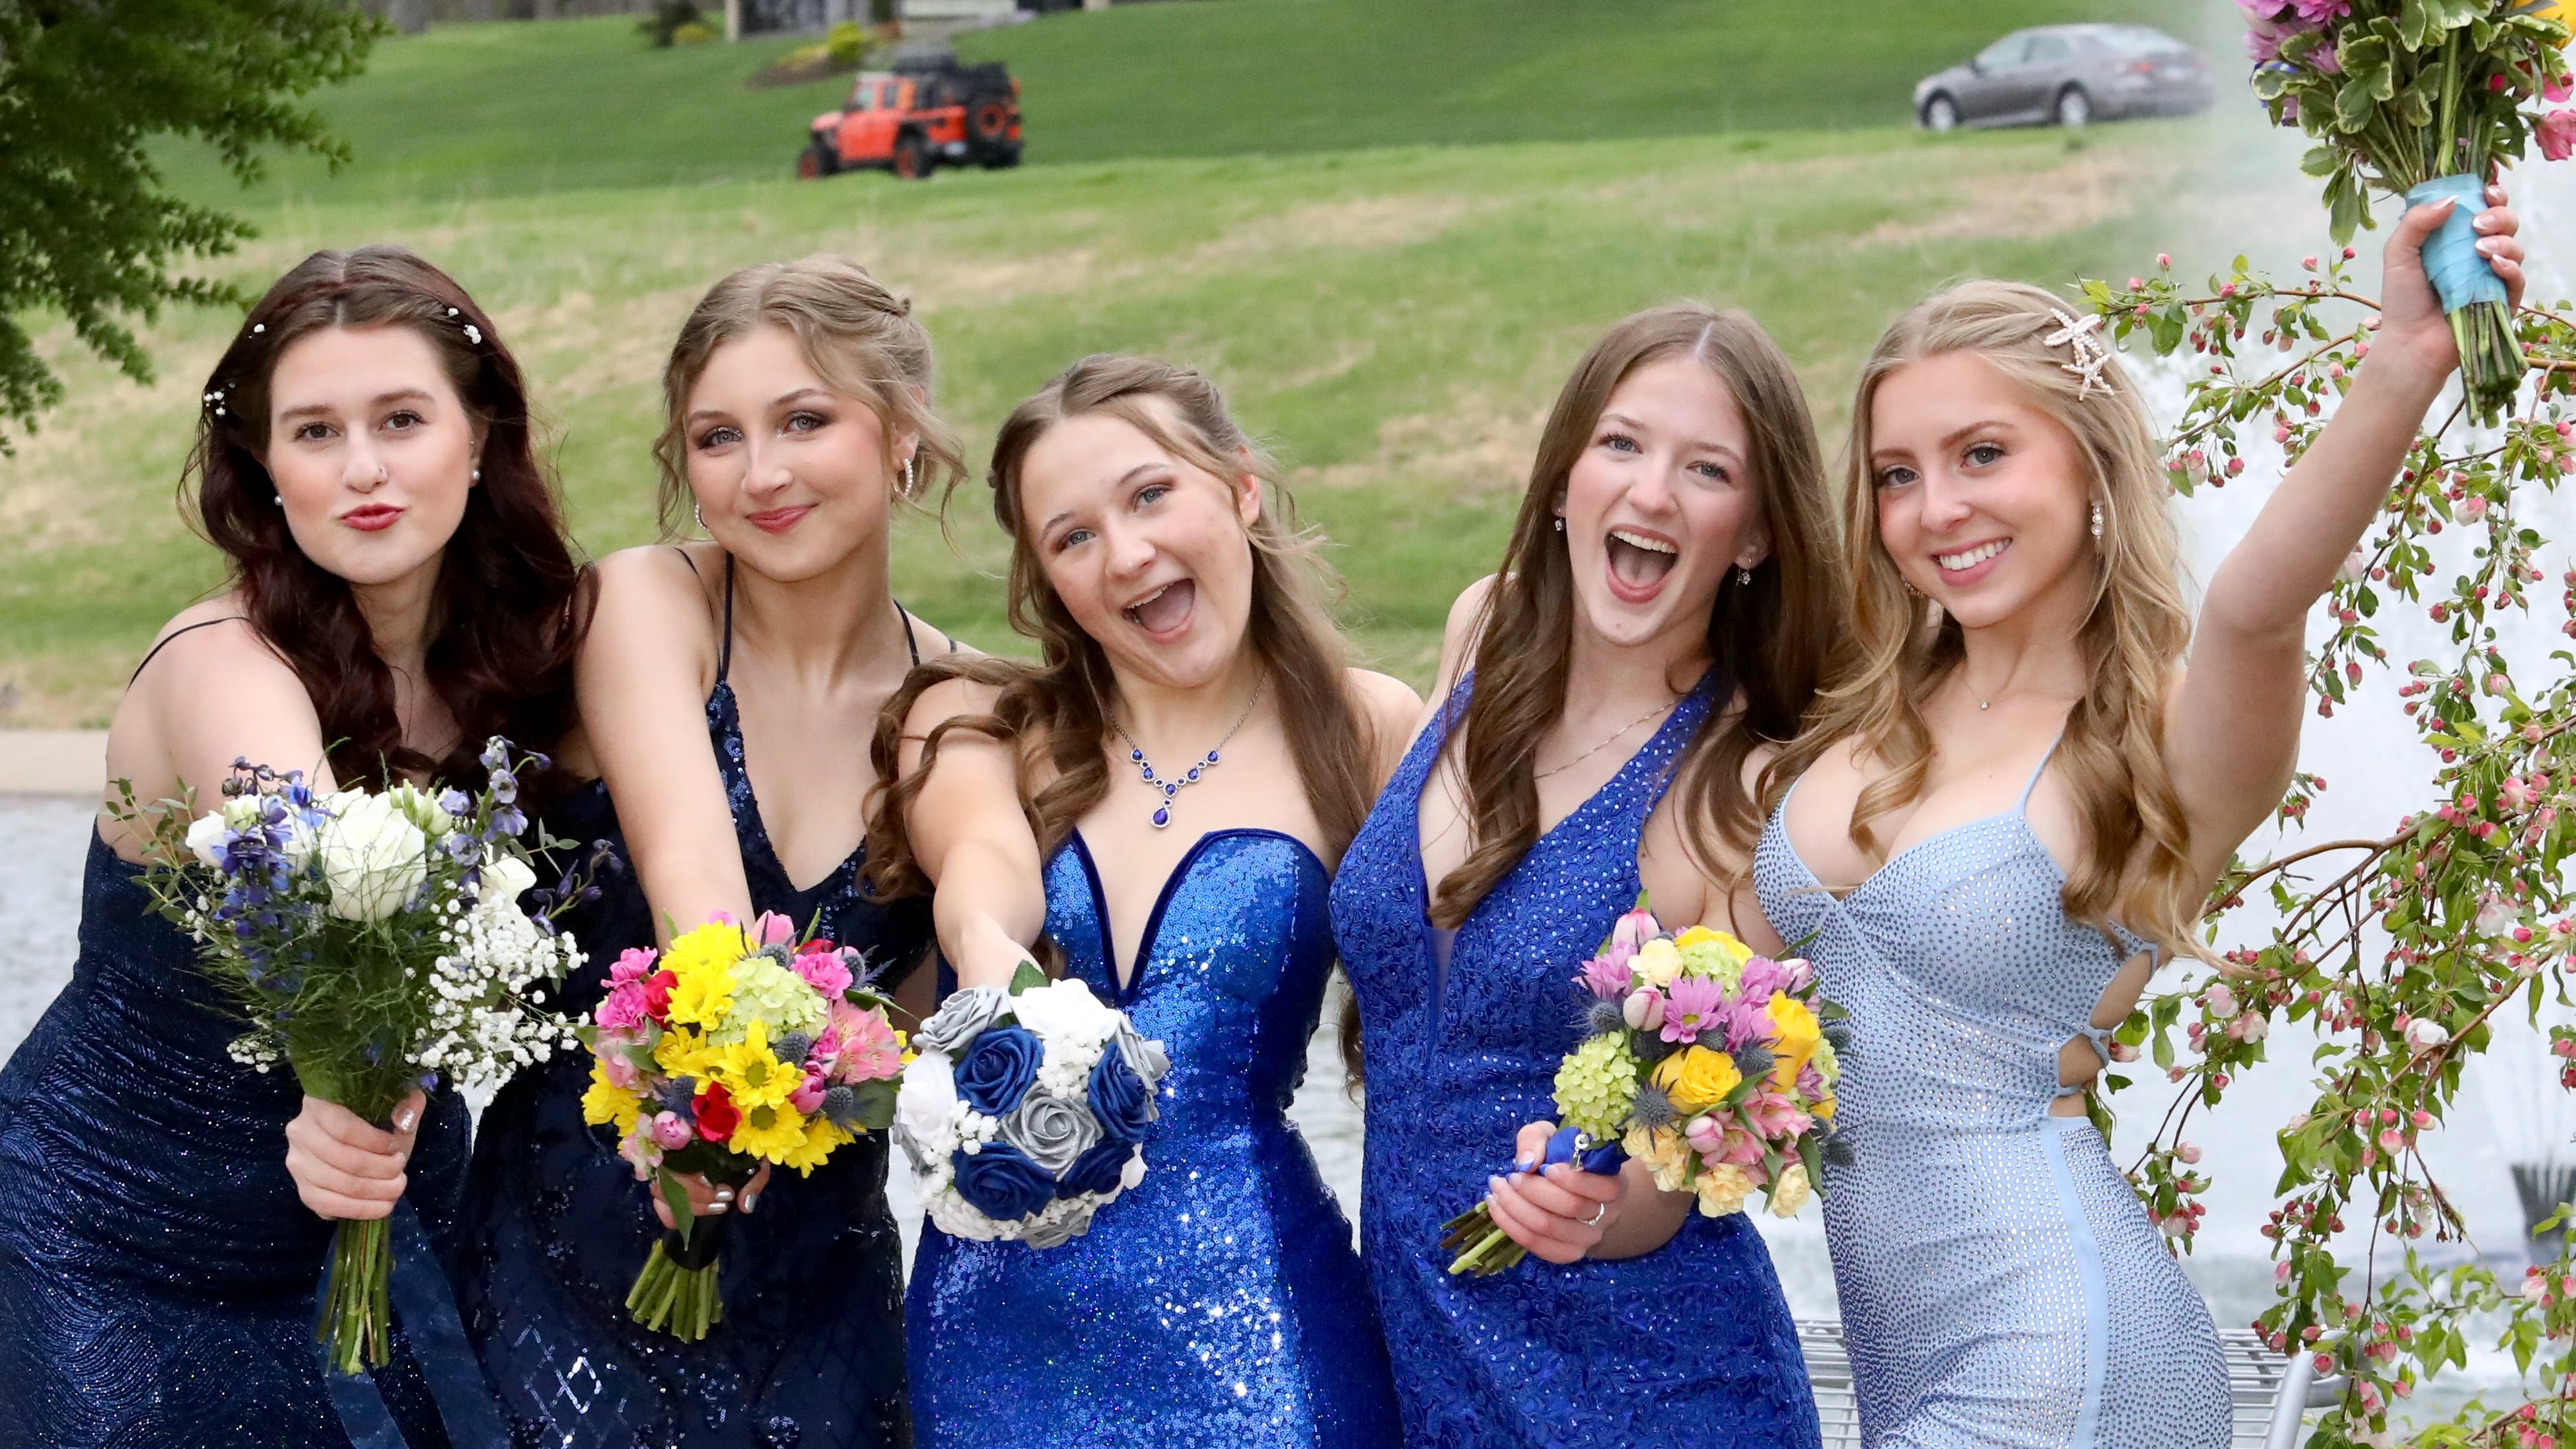 Looking for a special place for prom photos? Try one of these sites